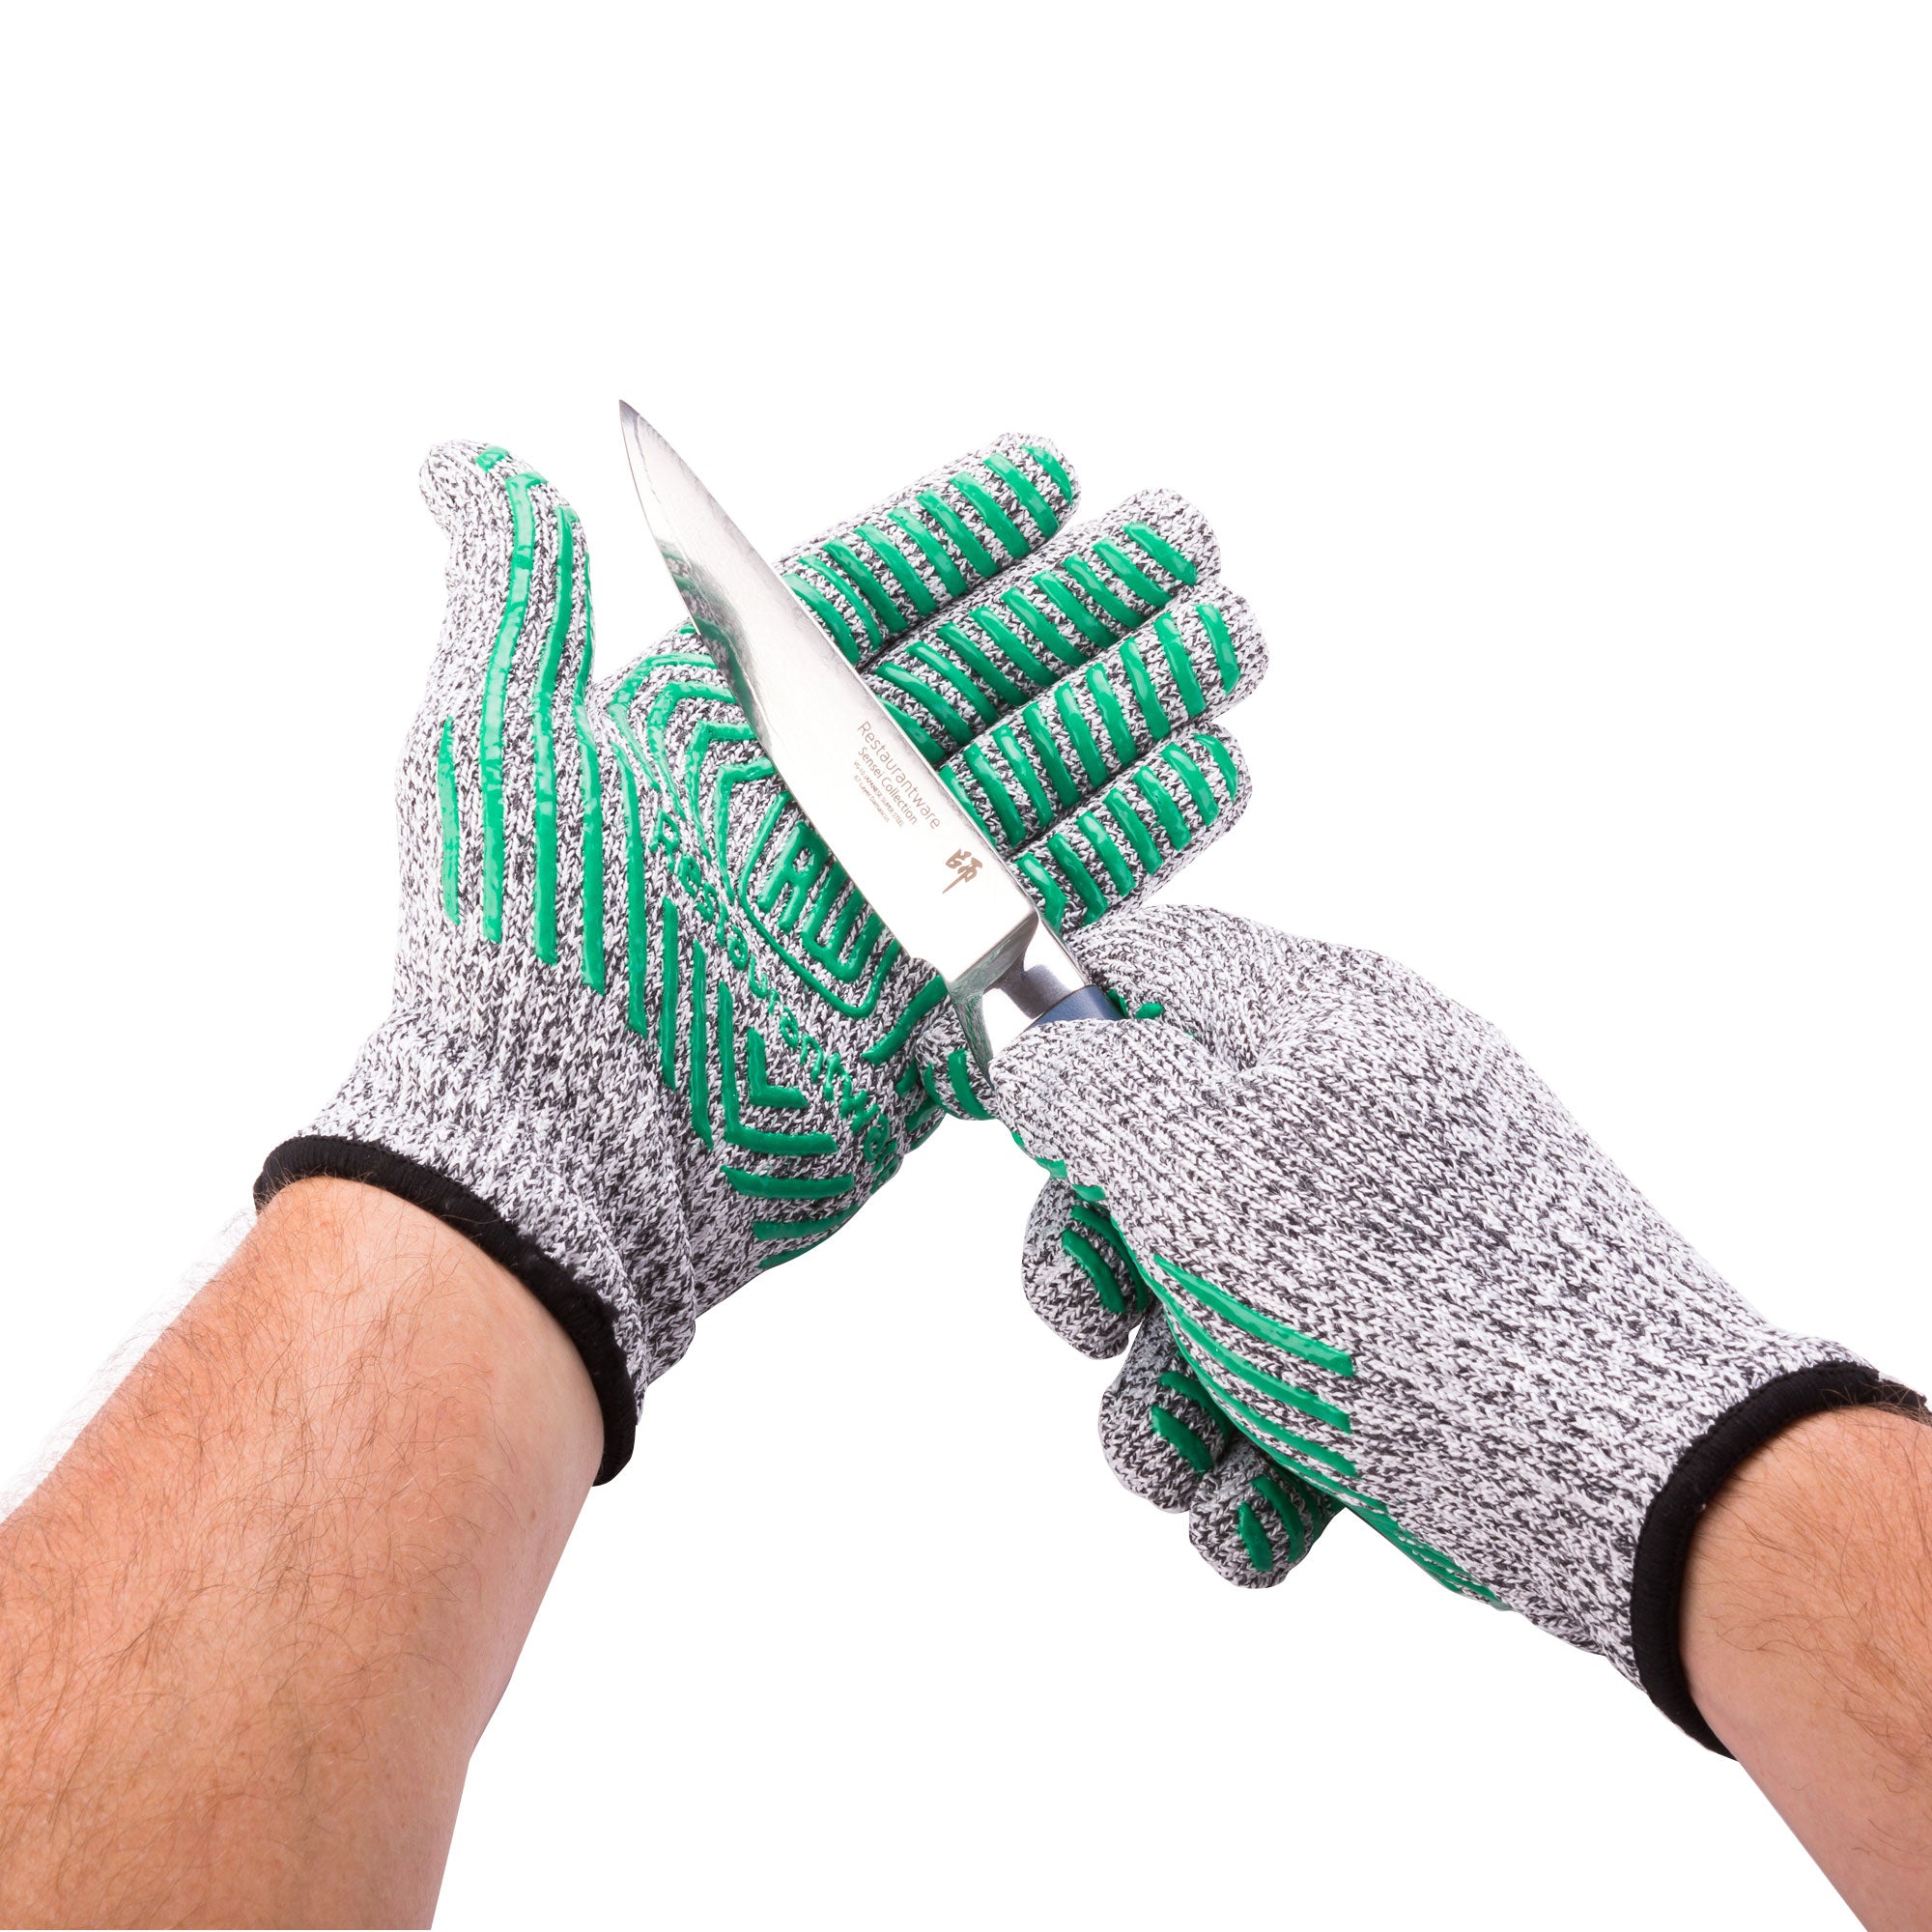 Safety Anti Cut Resistant Gloves Cut Proof Stab Resistant Metal Mesh Butcher  Gloves Level 5 Protection Glove Kitchen Tools From Paulelectronic, $2.69